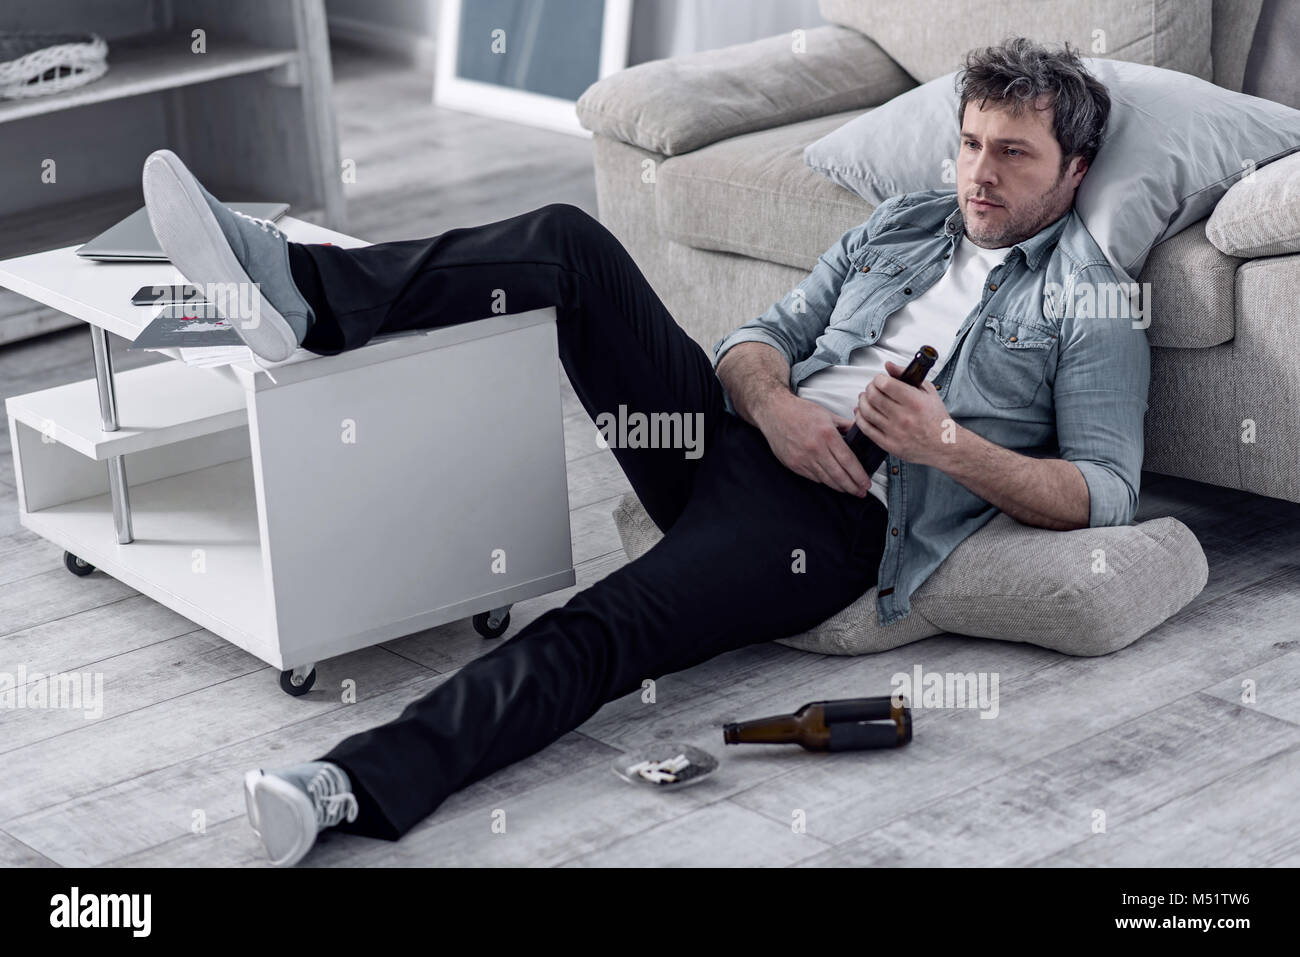 Unshaved man relaxing with his leg on a table and drinking alcohol Stock Photo